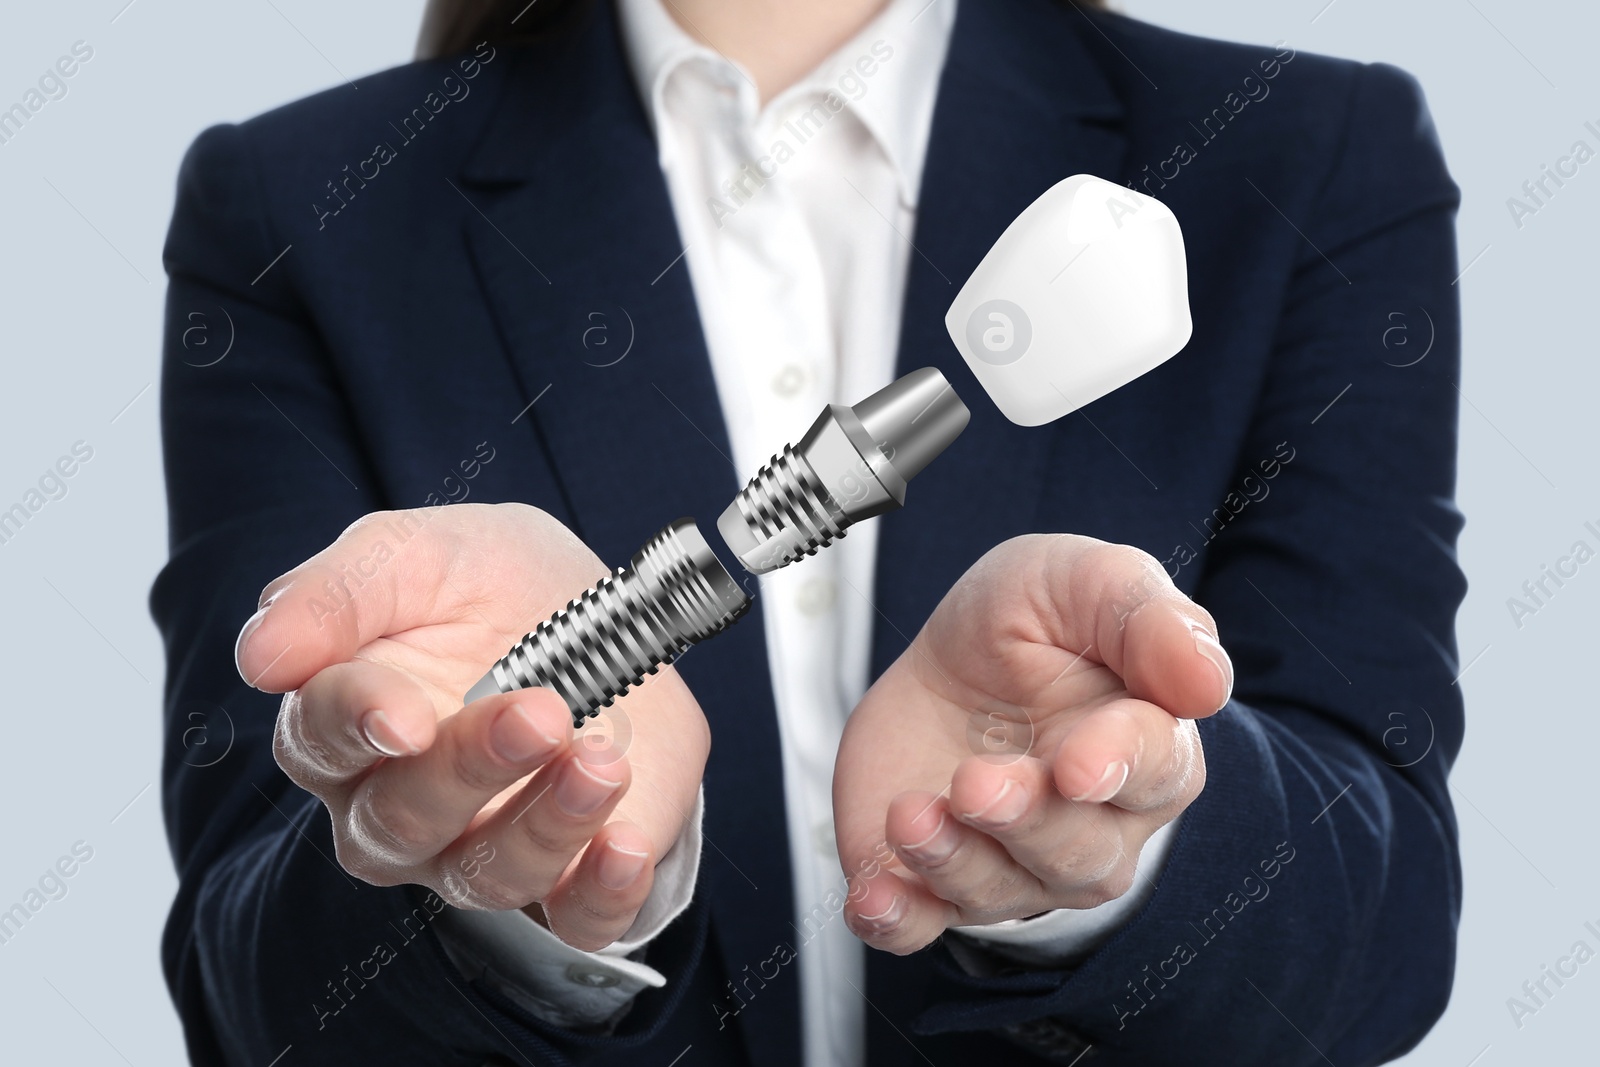 Image of Woman demonstrating dental implant on light background, closeup